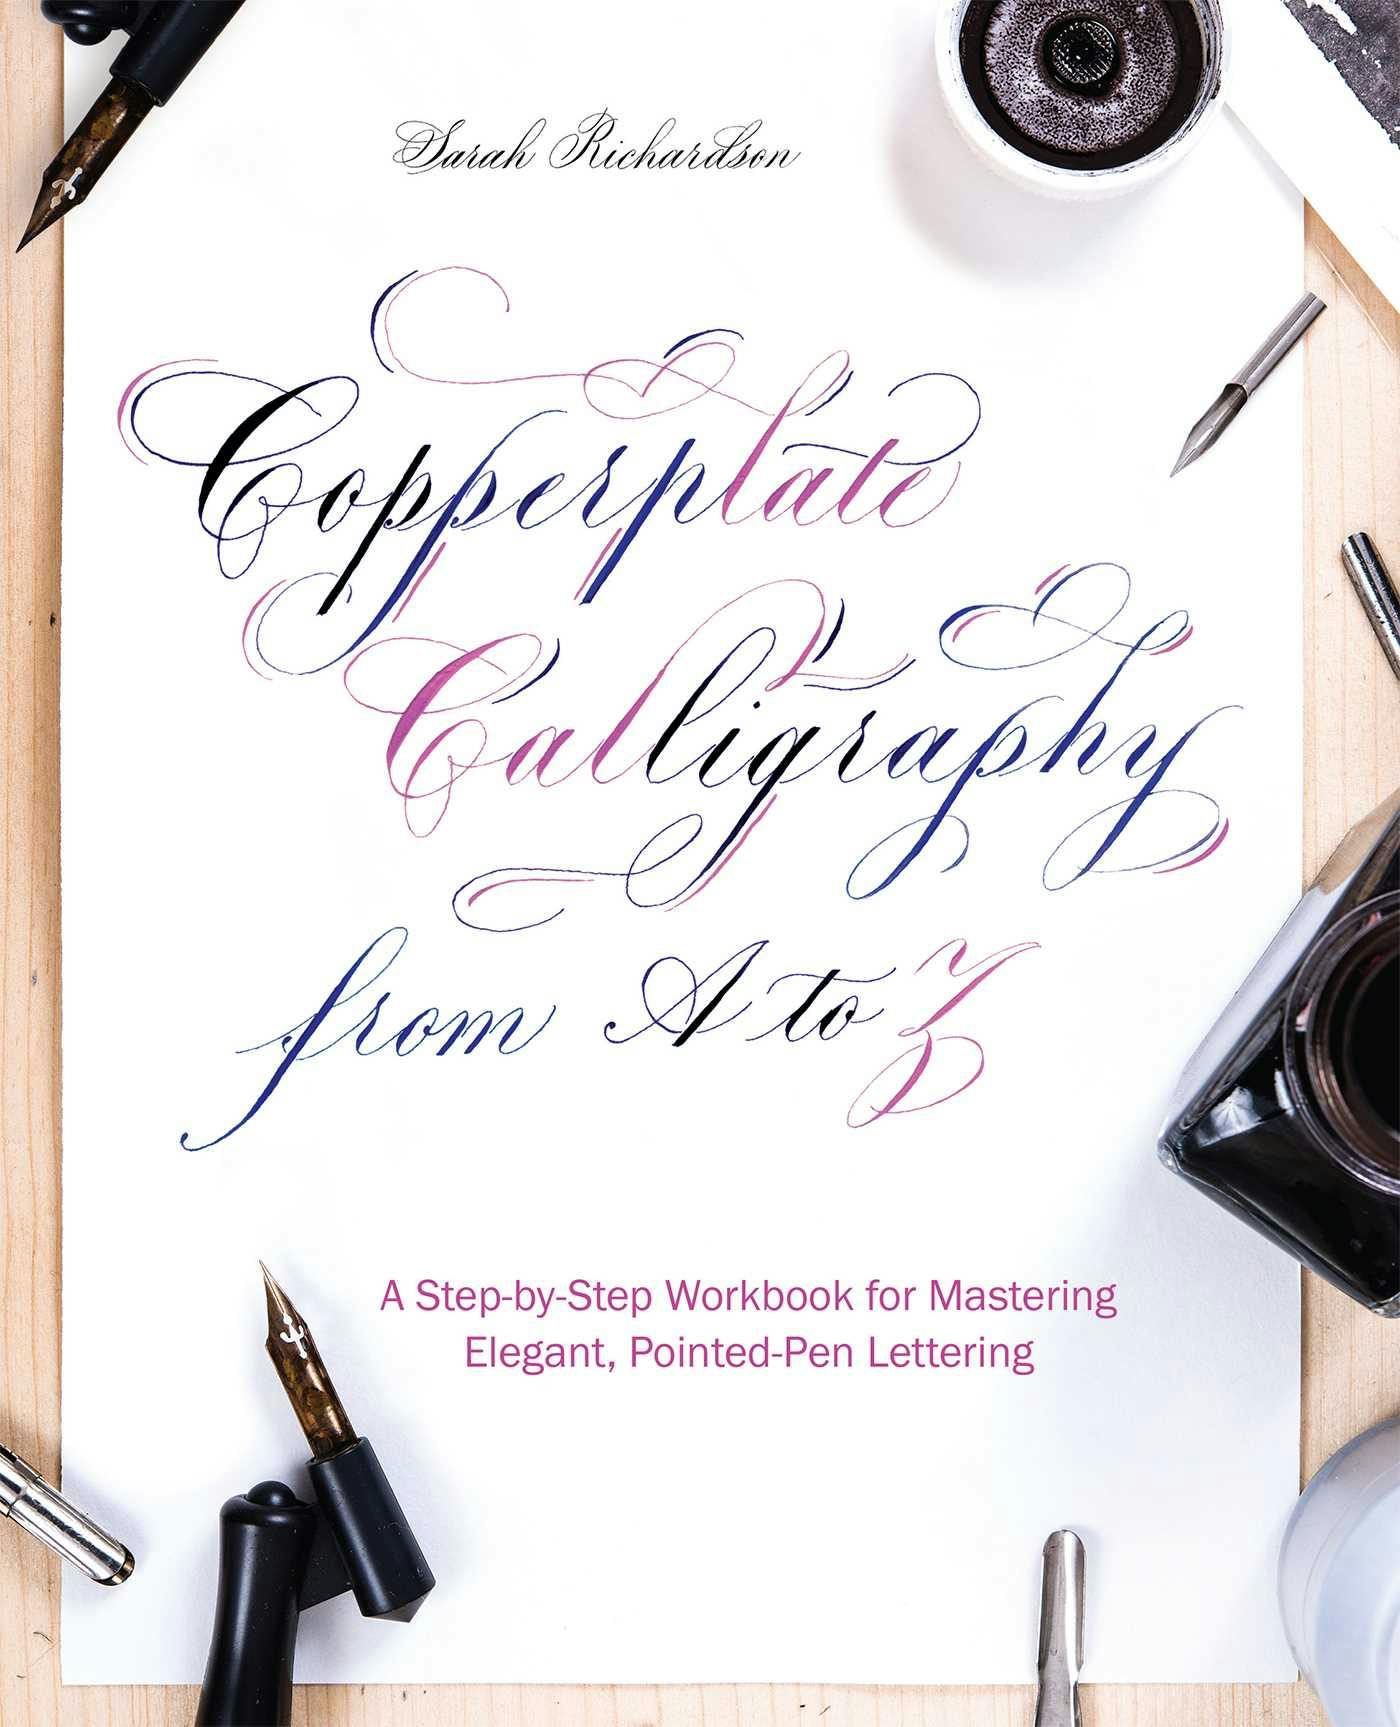 Copperplate Calligraphy from A to Z: A Step-by-Step Workbook for Mastering Elegant, Pointed-Pen Lettering - Sarah Richardson